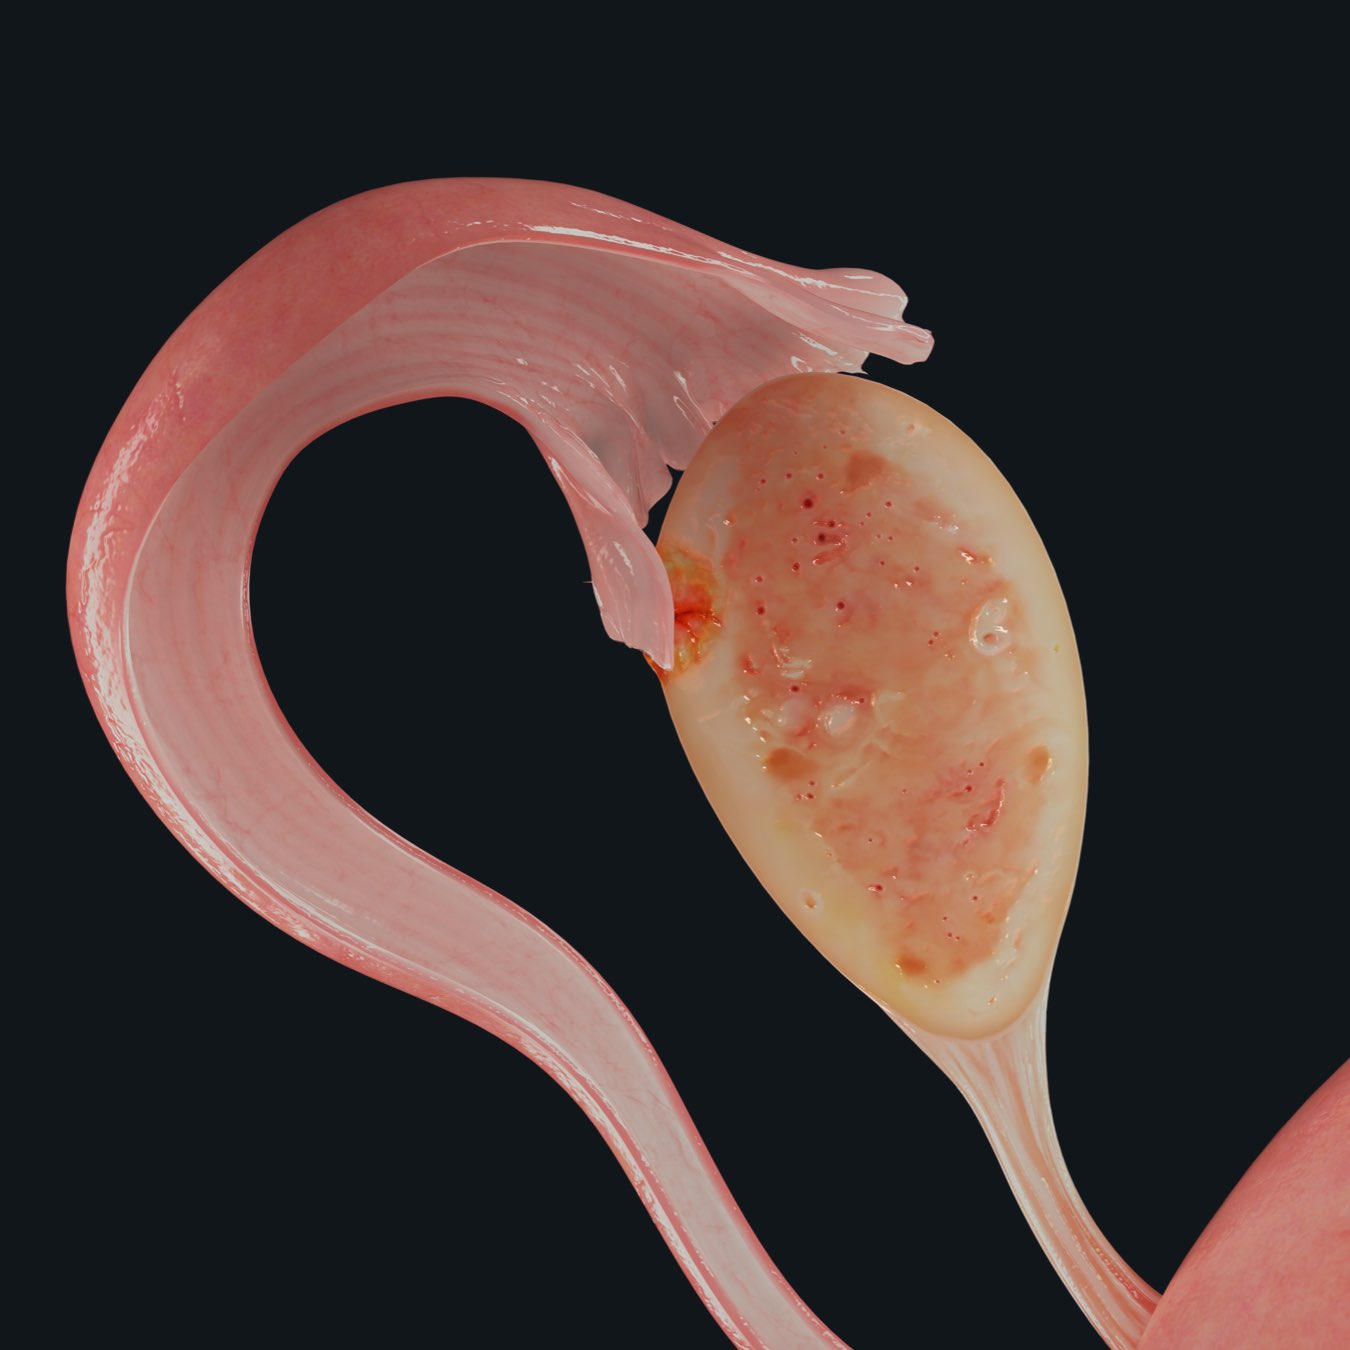 The uterus, part of the female pelvic prosection in Complete Anatomy